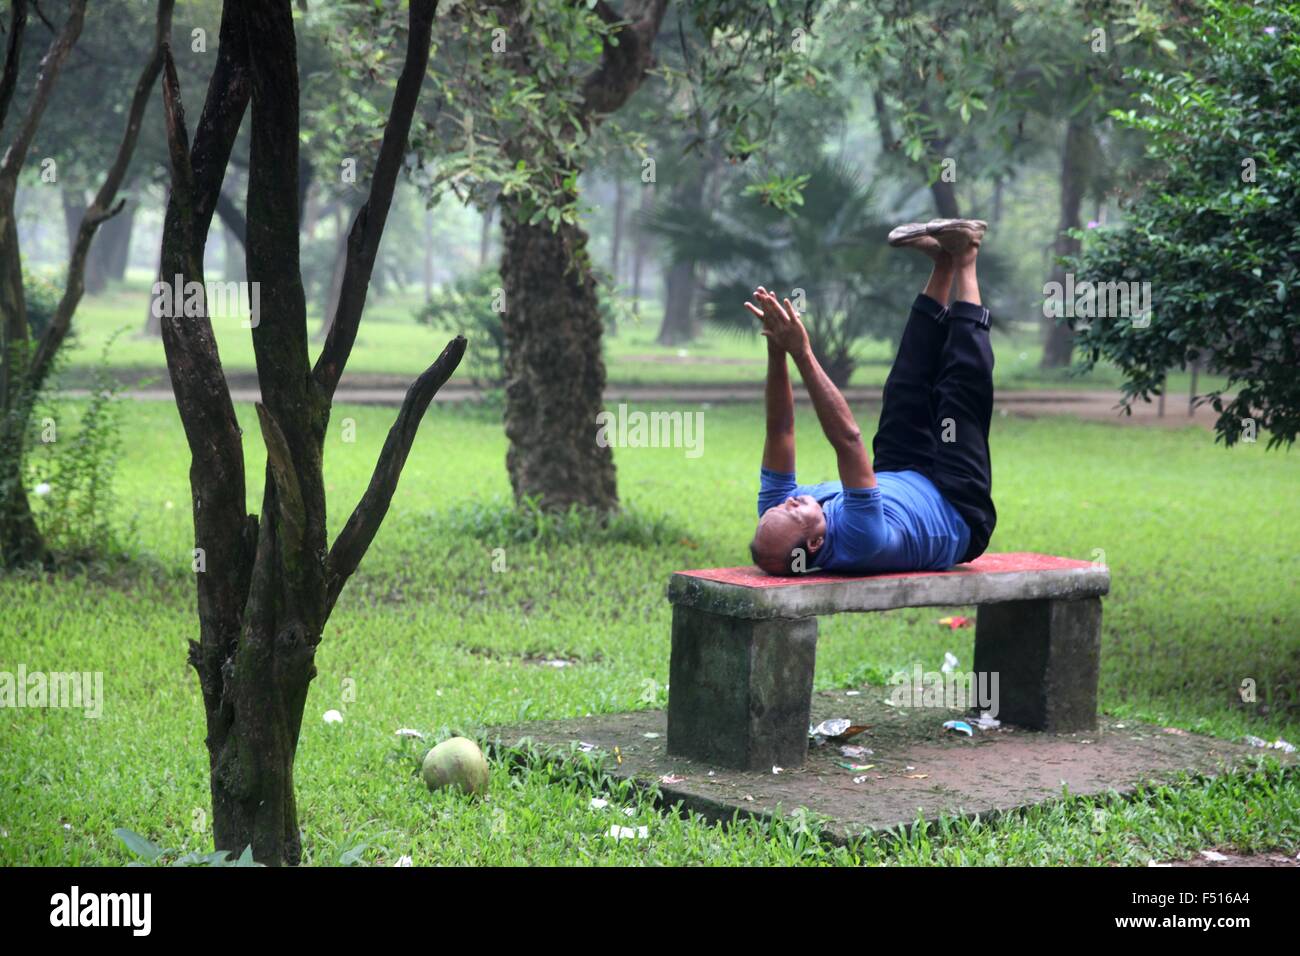 Dhaka, Bangladesh. 21st Oct, 2015. A man exercises early in the morning at Ramna park. Ramna park is a large and recreation area situated at the heart of the central Dhaka of Bangladesh on 21 October, 2015. The history of Ramna starts about 1610 CE during Mughal rule, when the city of Dhaka was founded by Subehdar Islam Khan under Emperor Jahangir. At that time two beautiful residential areas were developed in the northern suburb of Dhaka city. This park is one of the most beautiful areas in Dhaka with lots of trees and a lake near its center. ''ª Photo: Monirul Alam (Credit Image: © Monirul Stock Photo